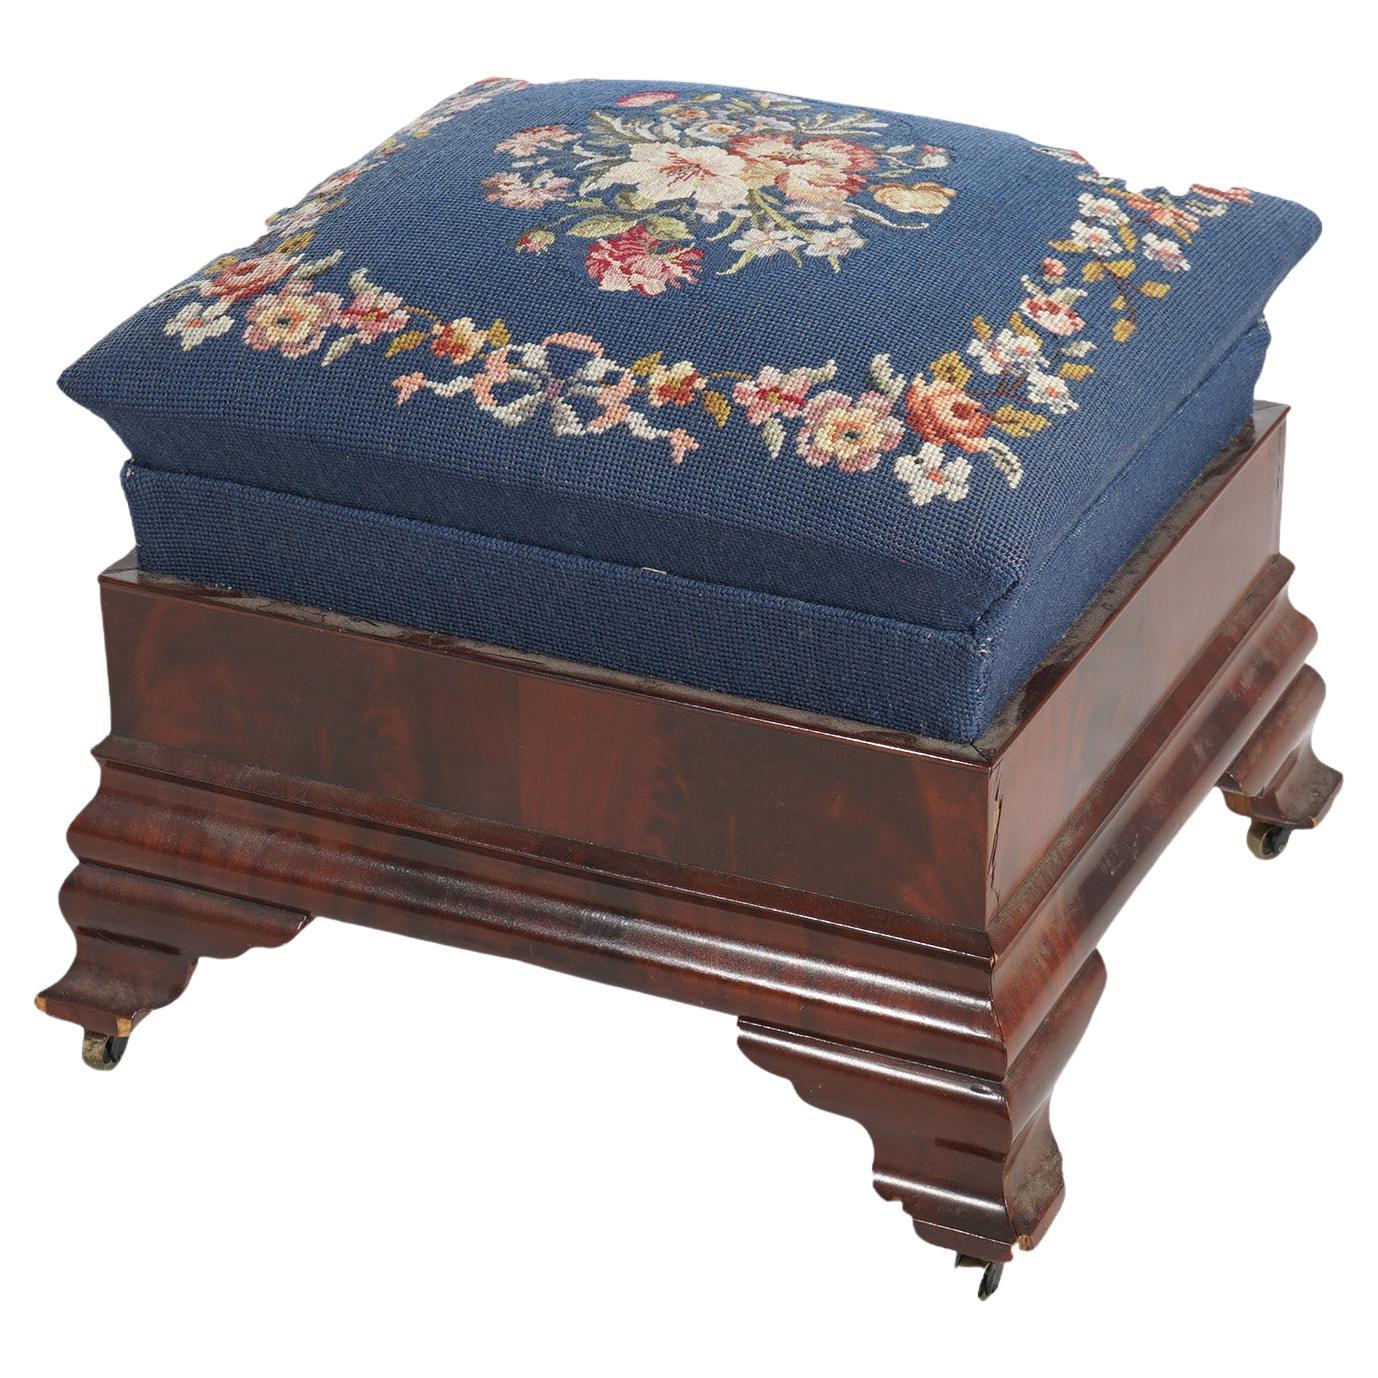 Antique American Empire Classical Greco Flame Mahogany Needlepoint Stool 19thC For Sale